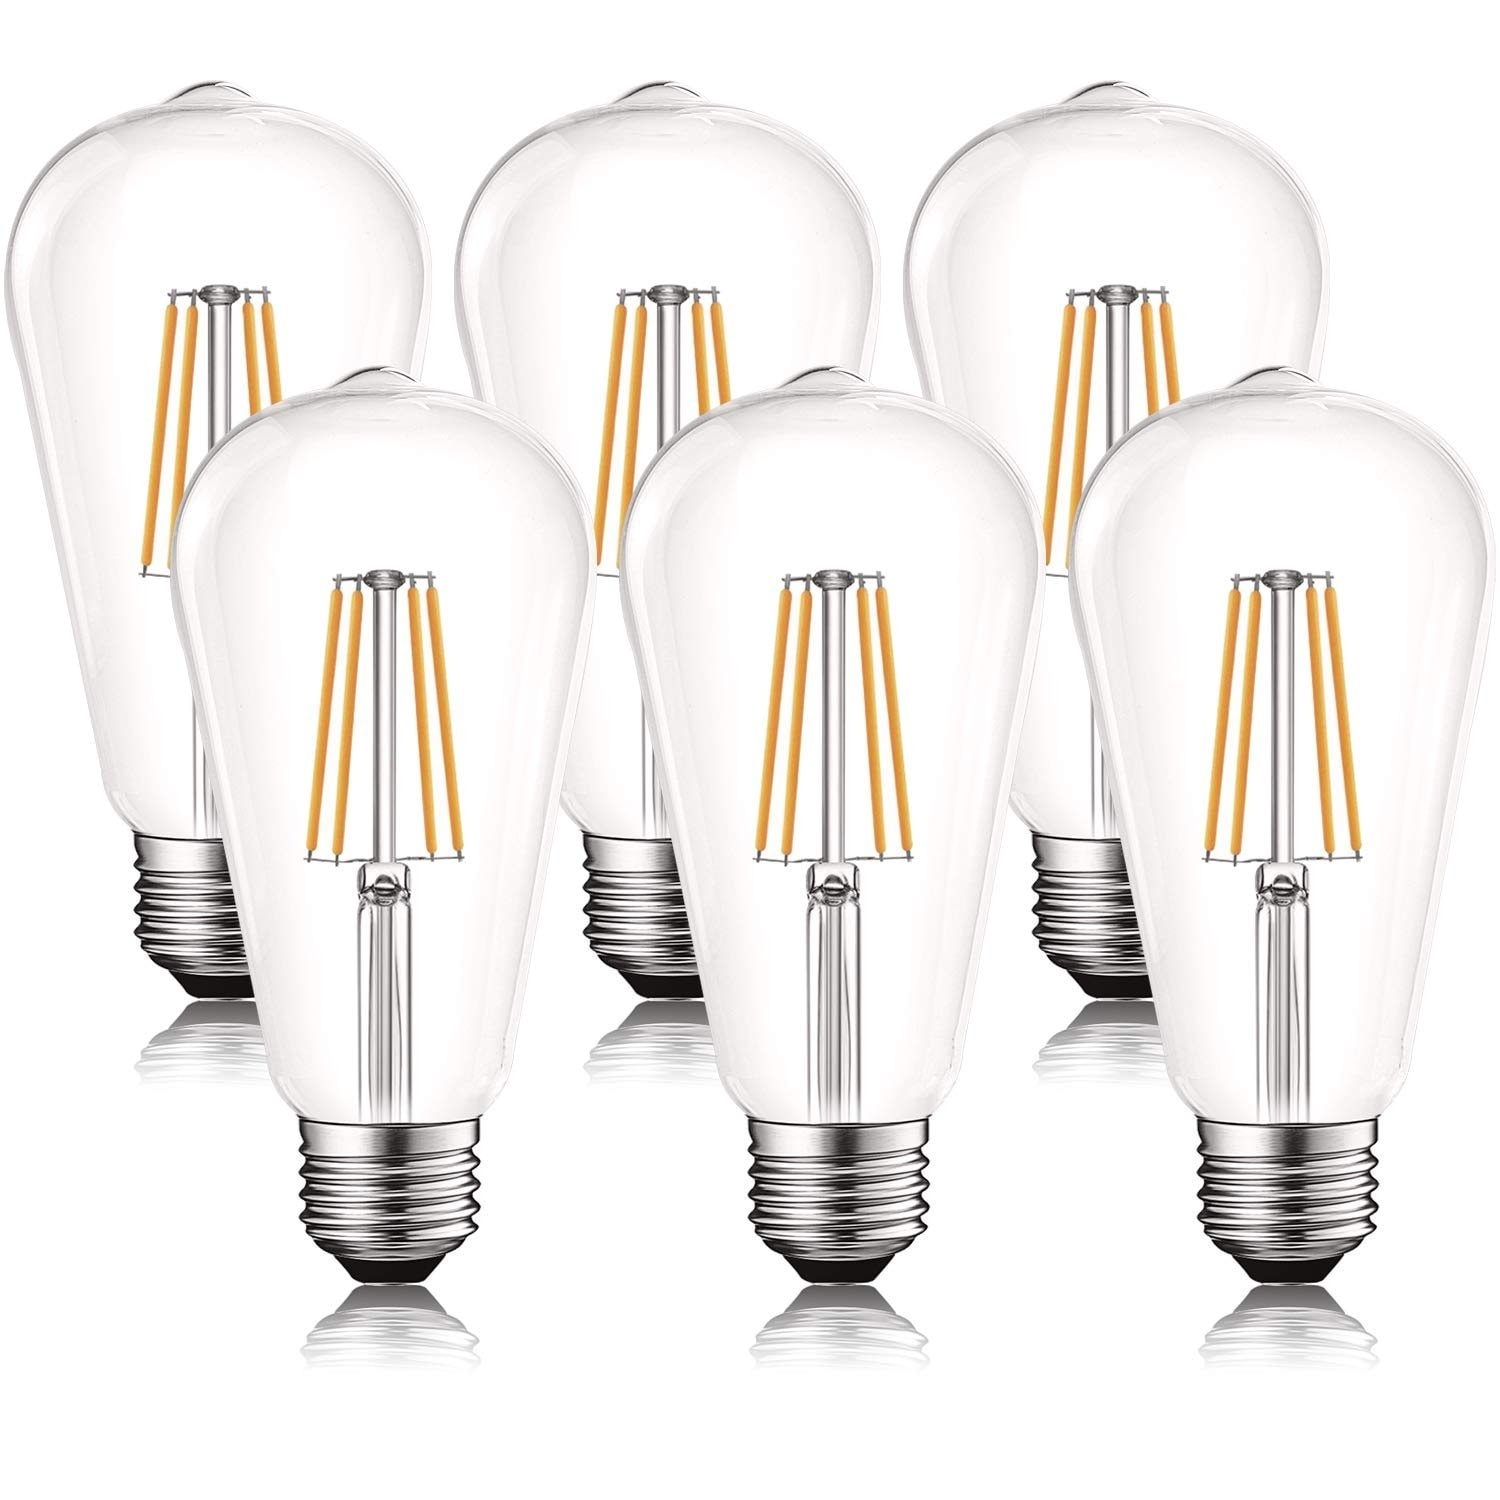 Clear Glass ST58 Vintage LED Filament Bulbs Non-Dimmable 4 Packs E26 Base 700 Lumens Ascher LED Edison Bulbs 6W High Brightness Daylight White 4000K Equivalent 60W